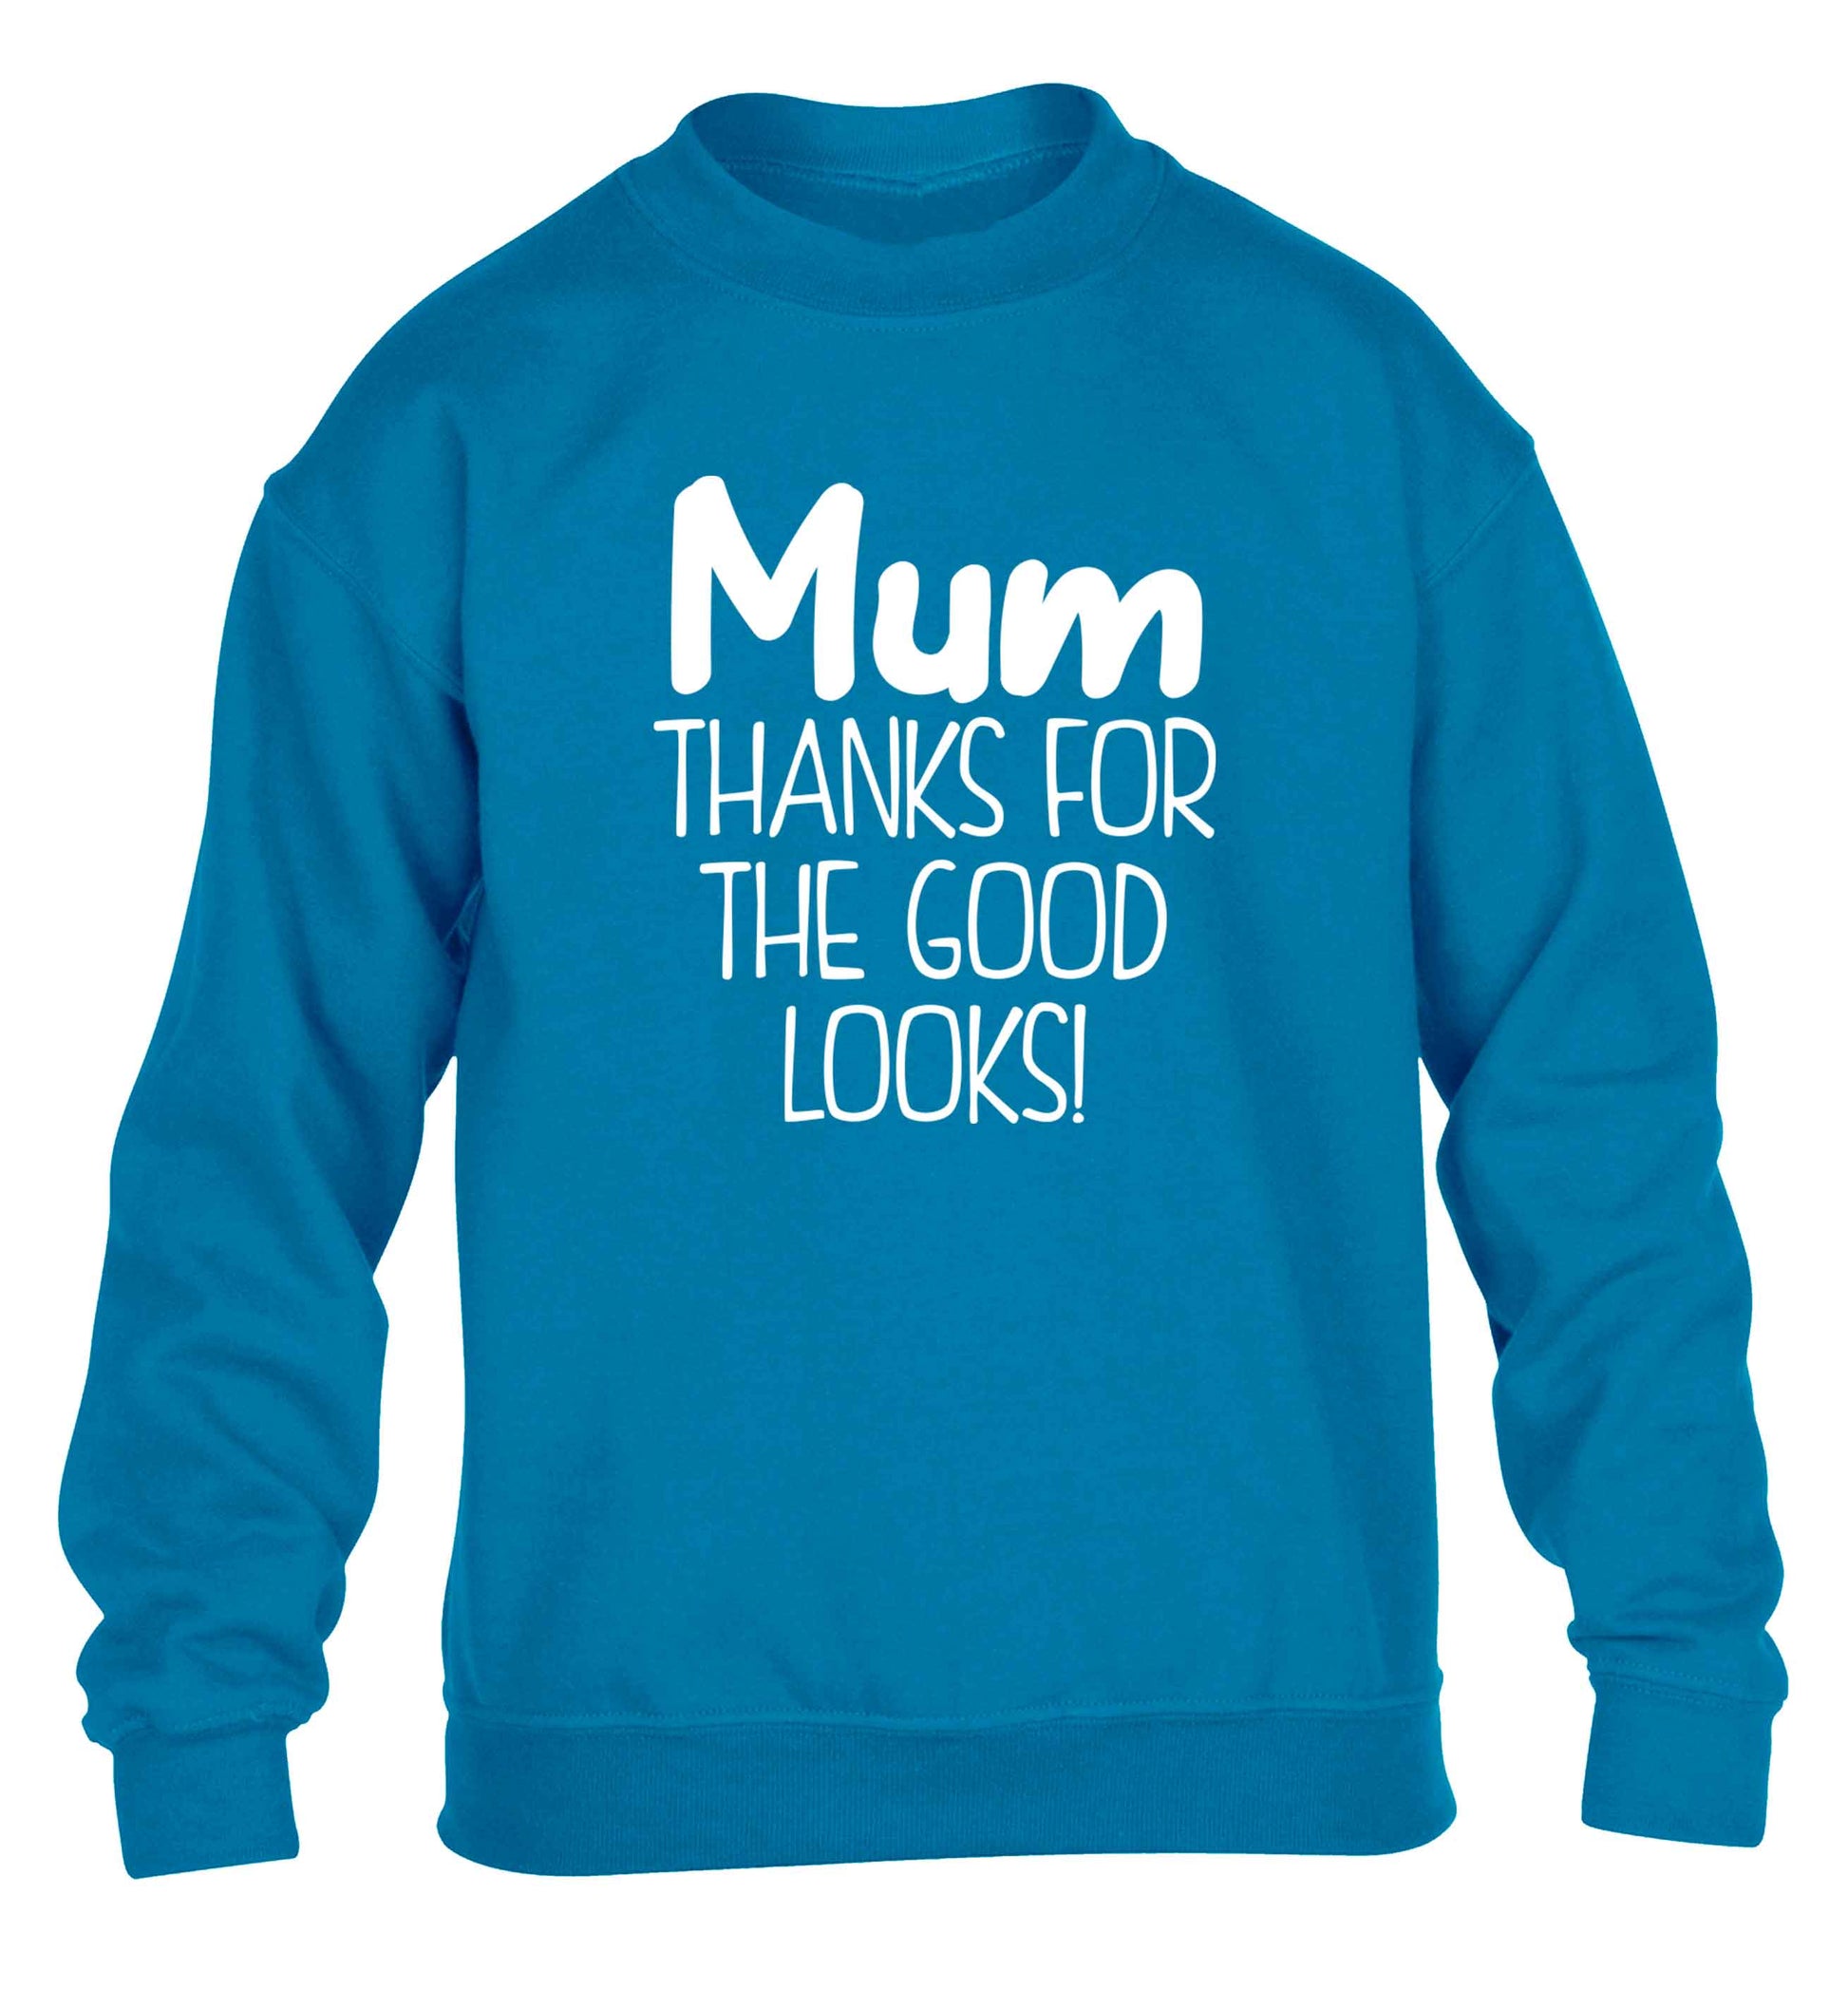 Mum thanks for the good looks! children's blue sweater 12-13 Years